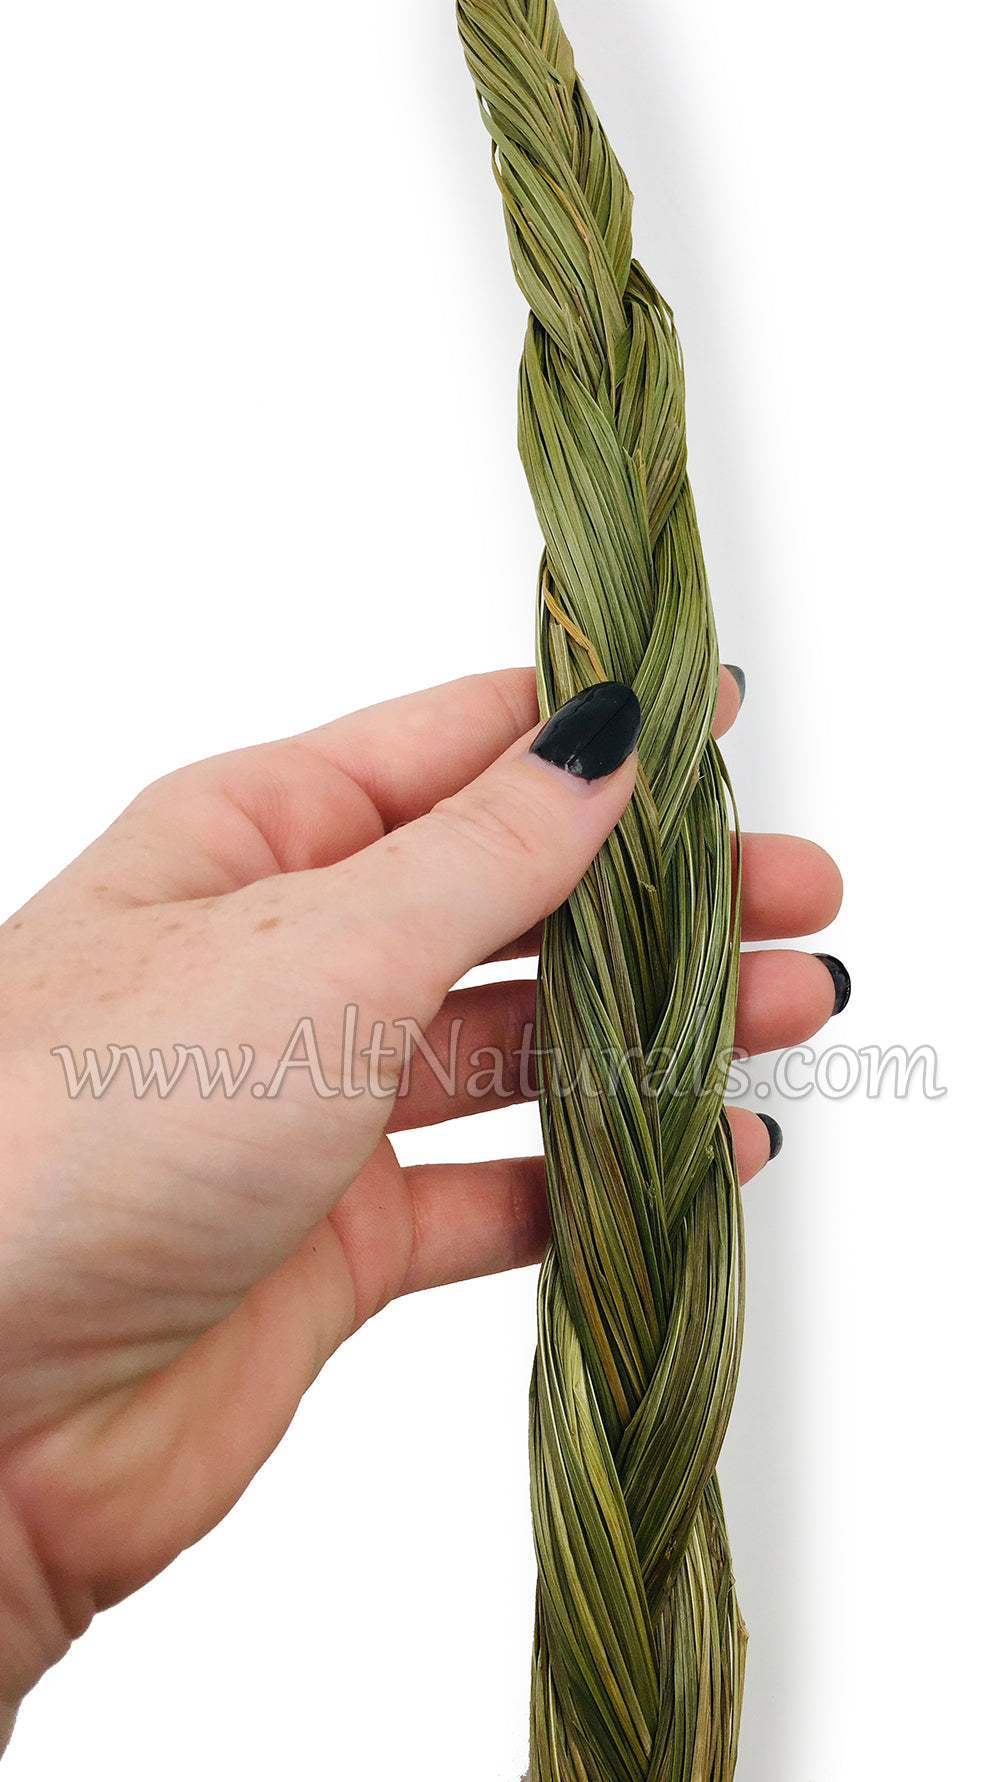  CircuitOffice Sweetgrass Braid 24 Smudging Herb Incense For  Purifying, Cleansing, Healing, Metaphysical, Meditation and Wicca : Home &  Kitchen